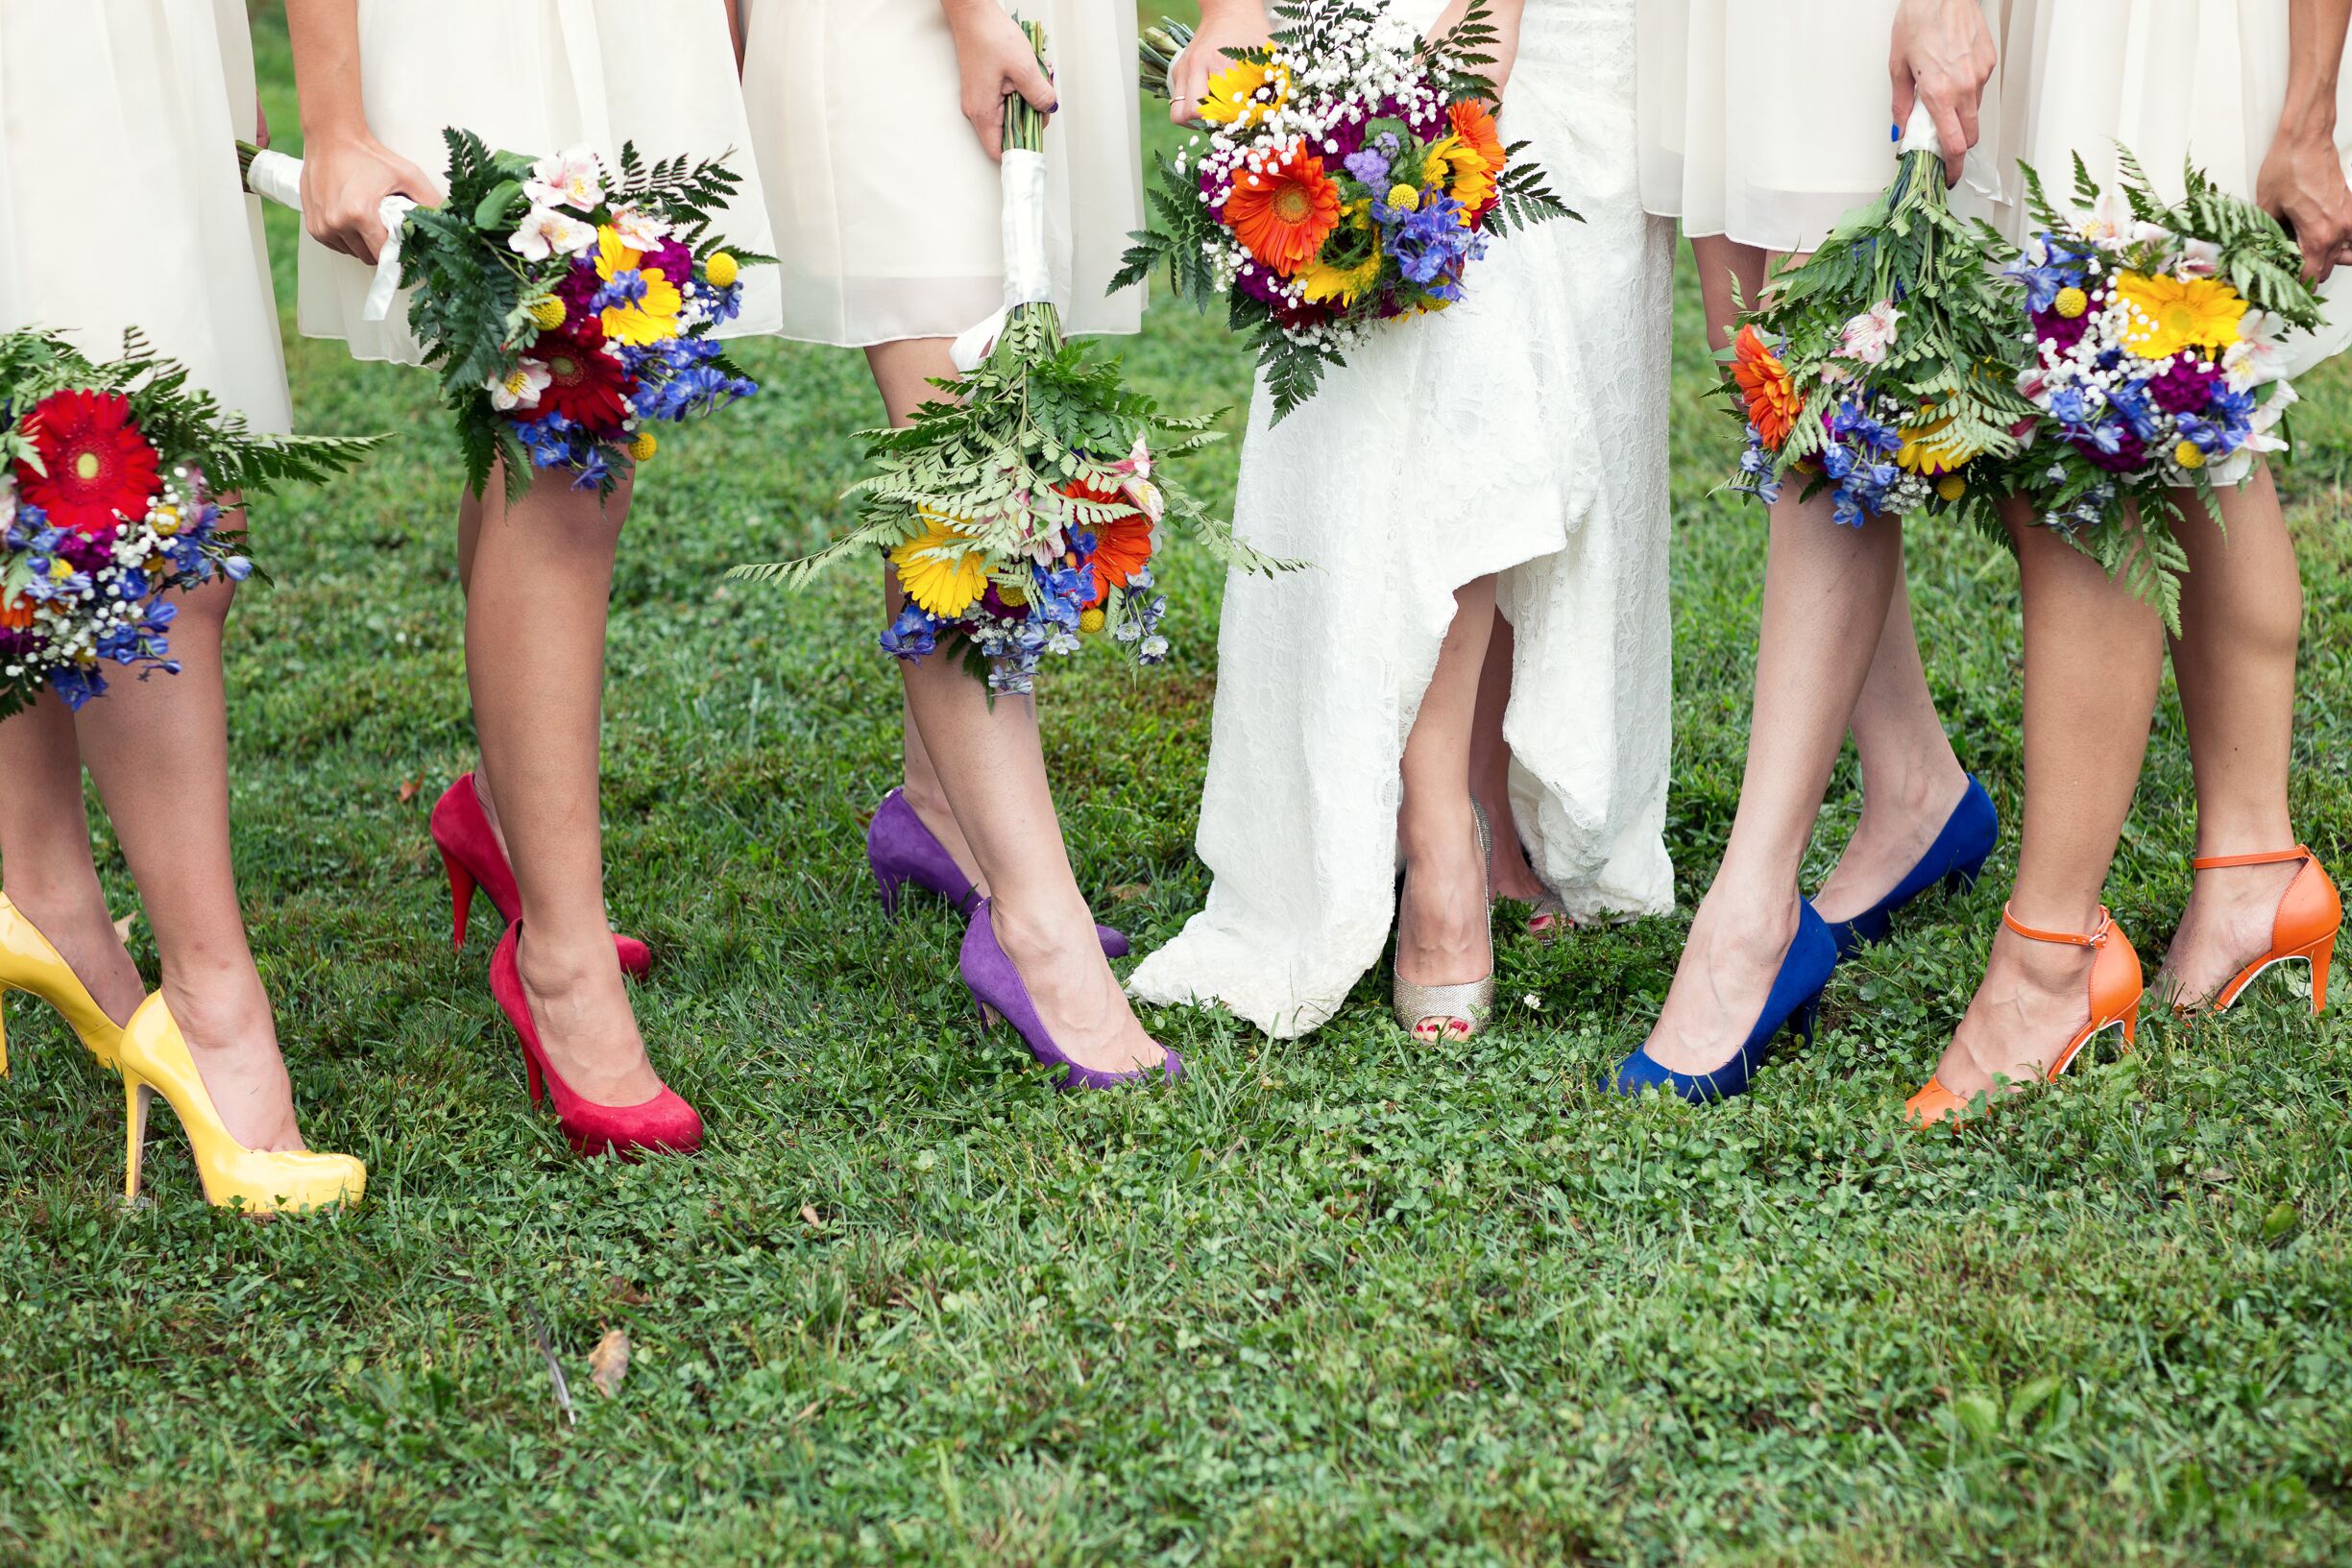 The Bridesmaids' Rainbow Shoes and Colorful Bouquets